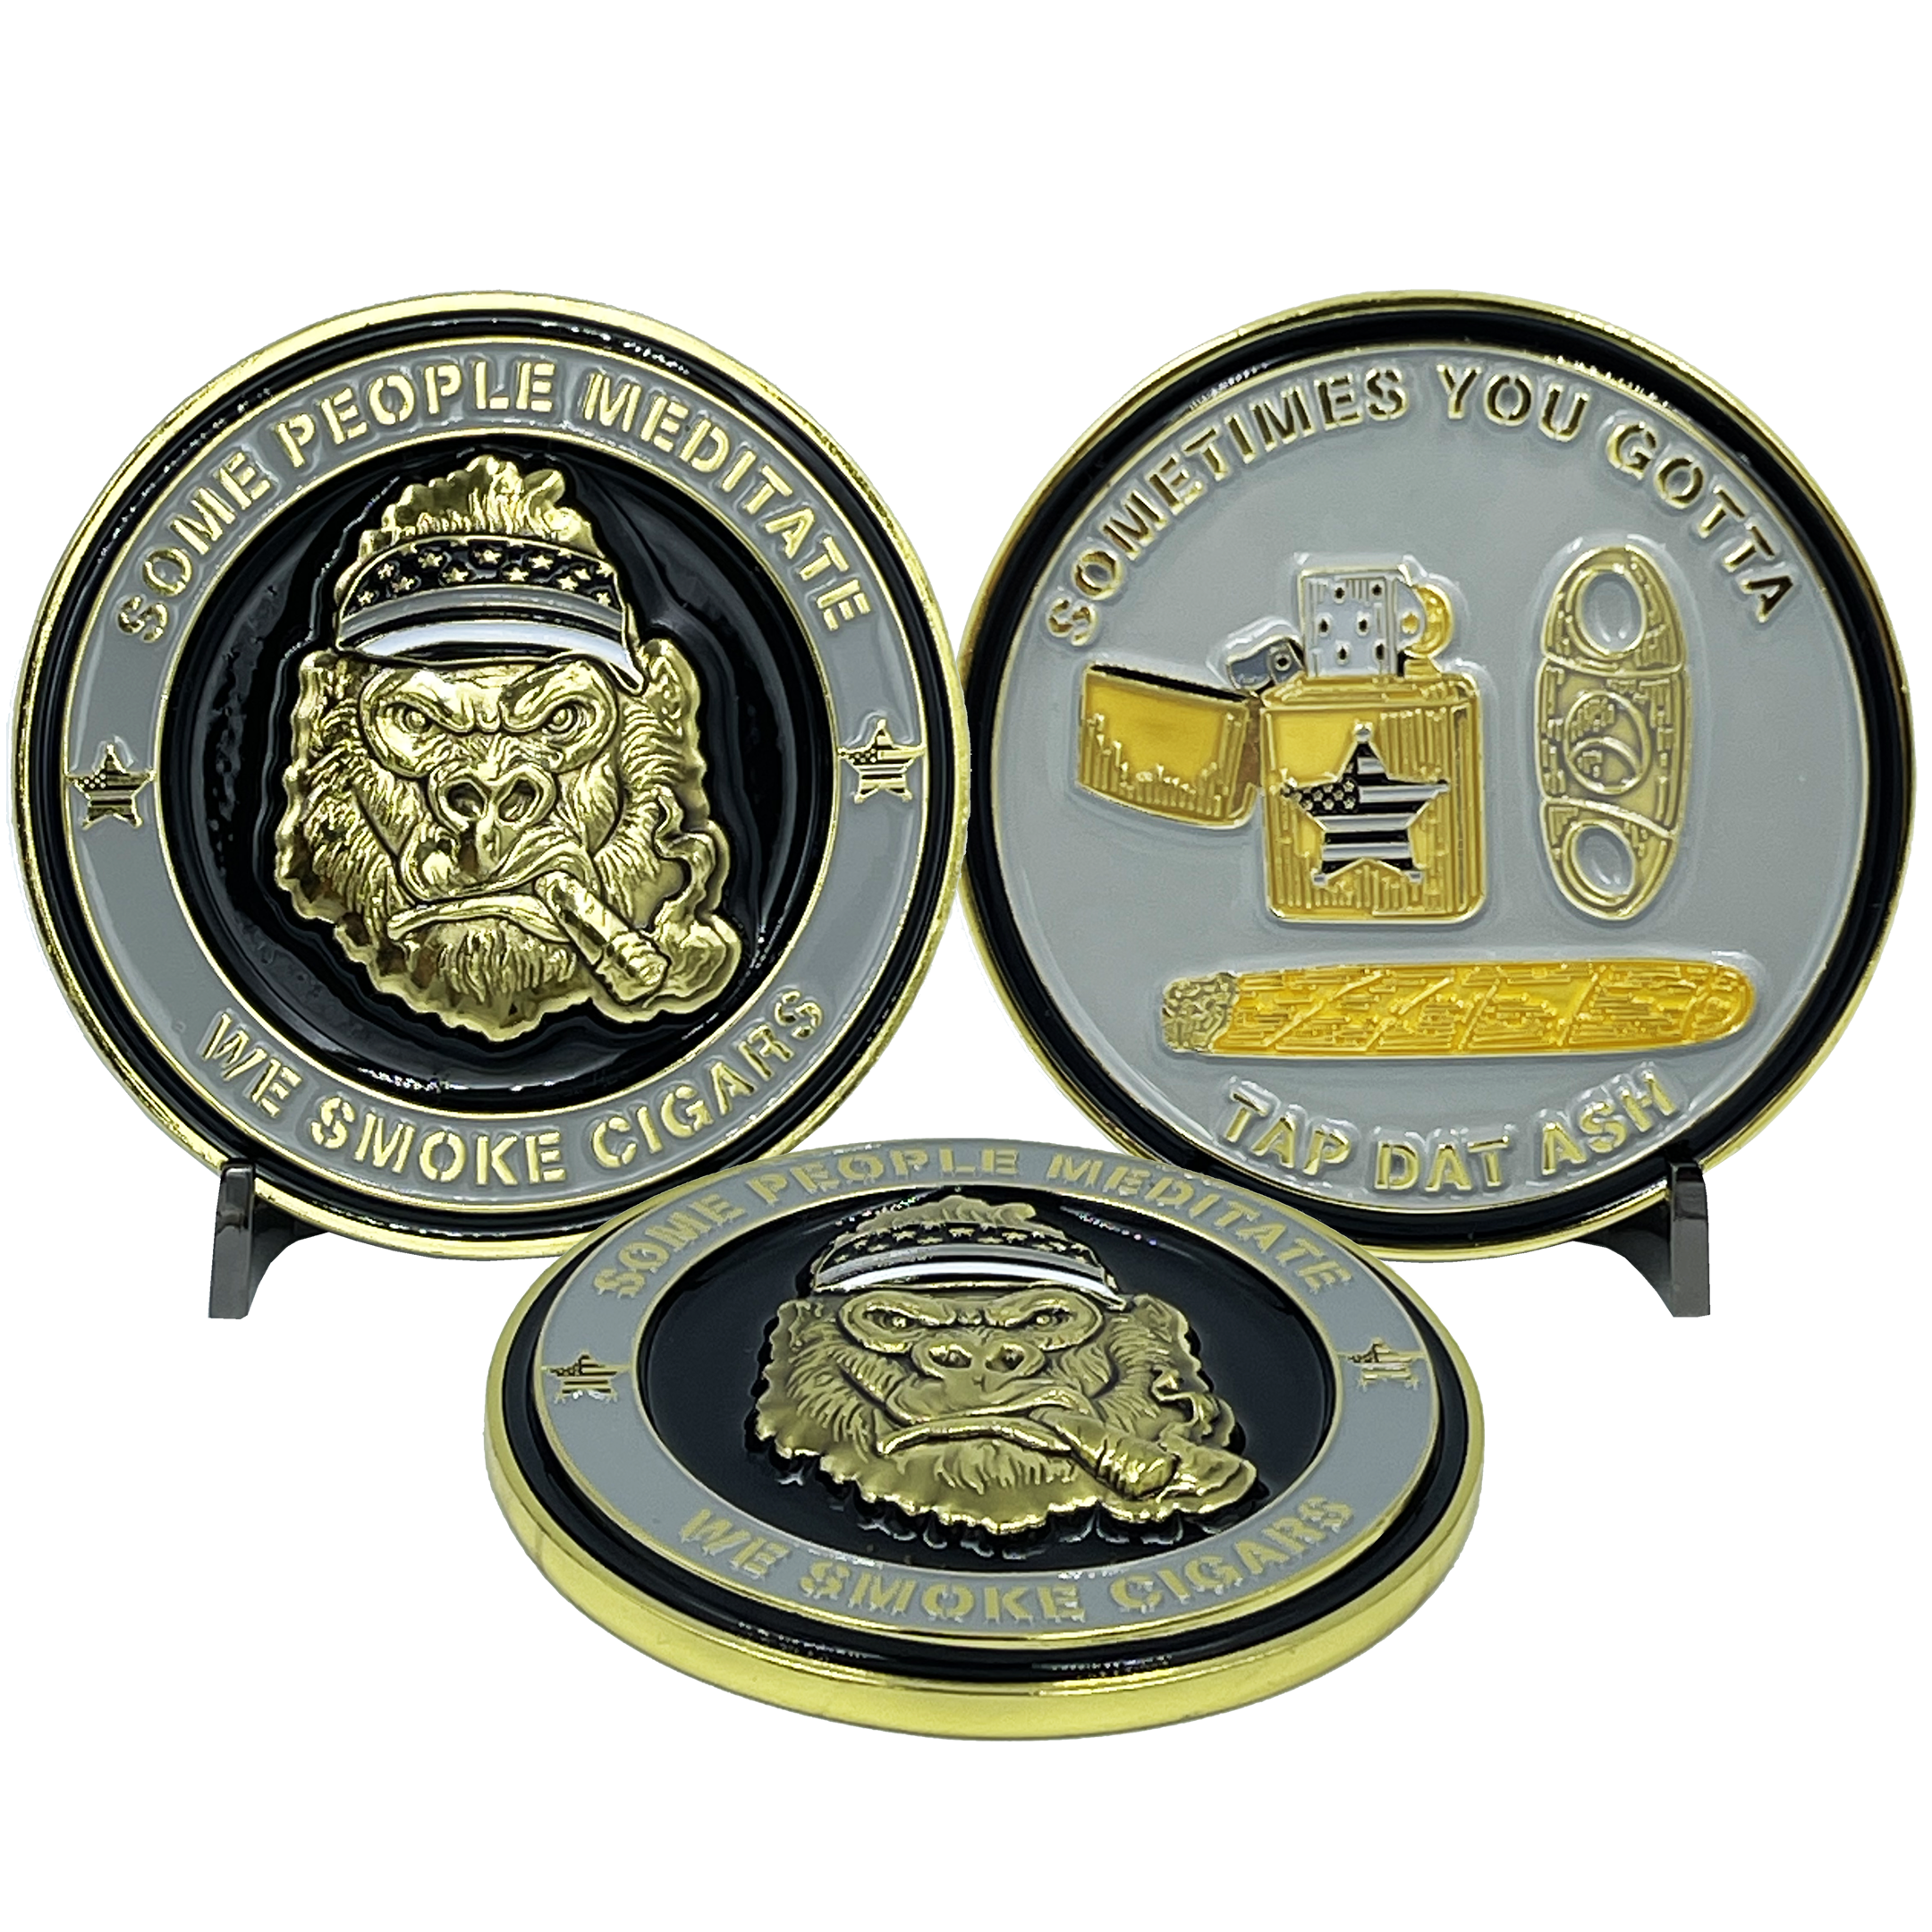 BL12-010 Corrections CO Thin Gray Line Correctional Officer Cigar Gorilla Challenge Coin Tap Dat Ash SOME PEOPLE MEDITATE WE SMOKE CIGARS